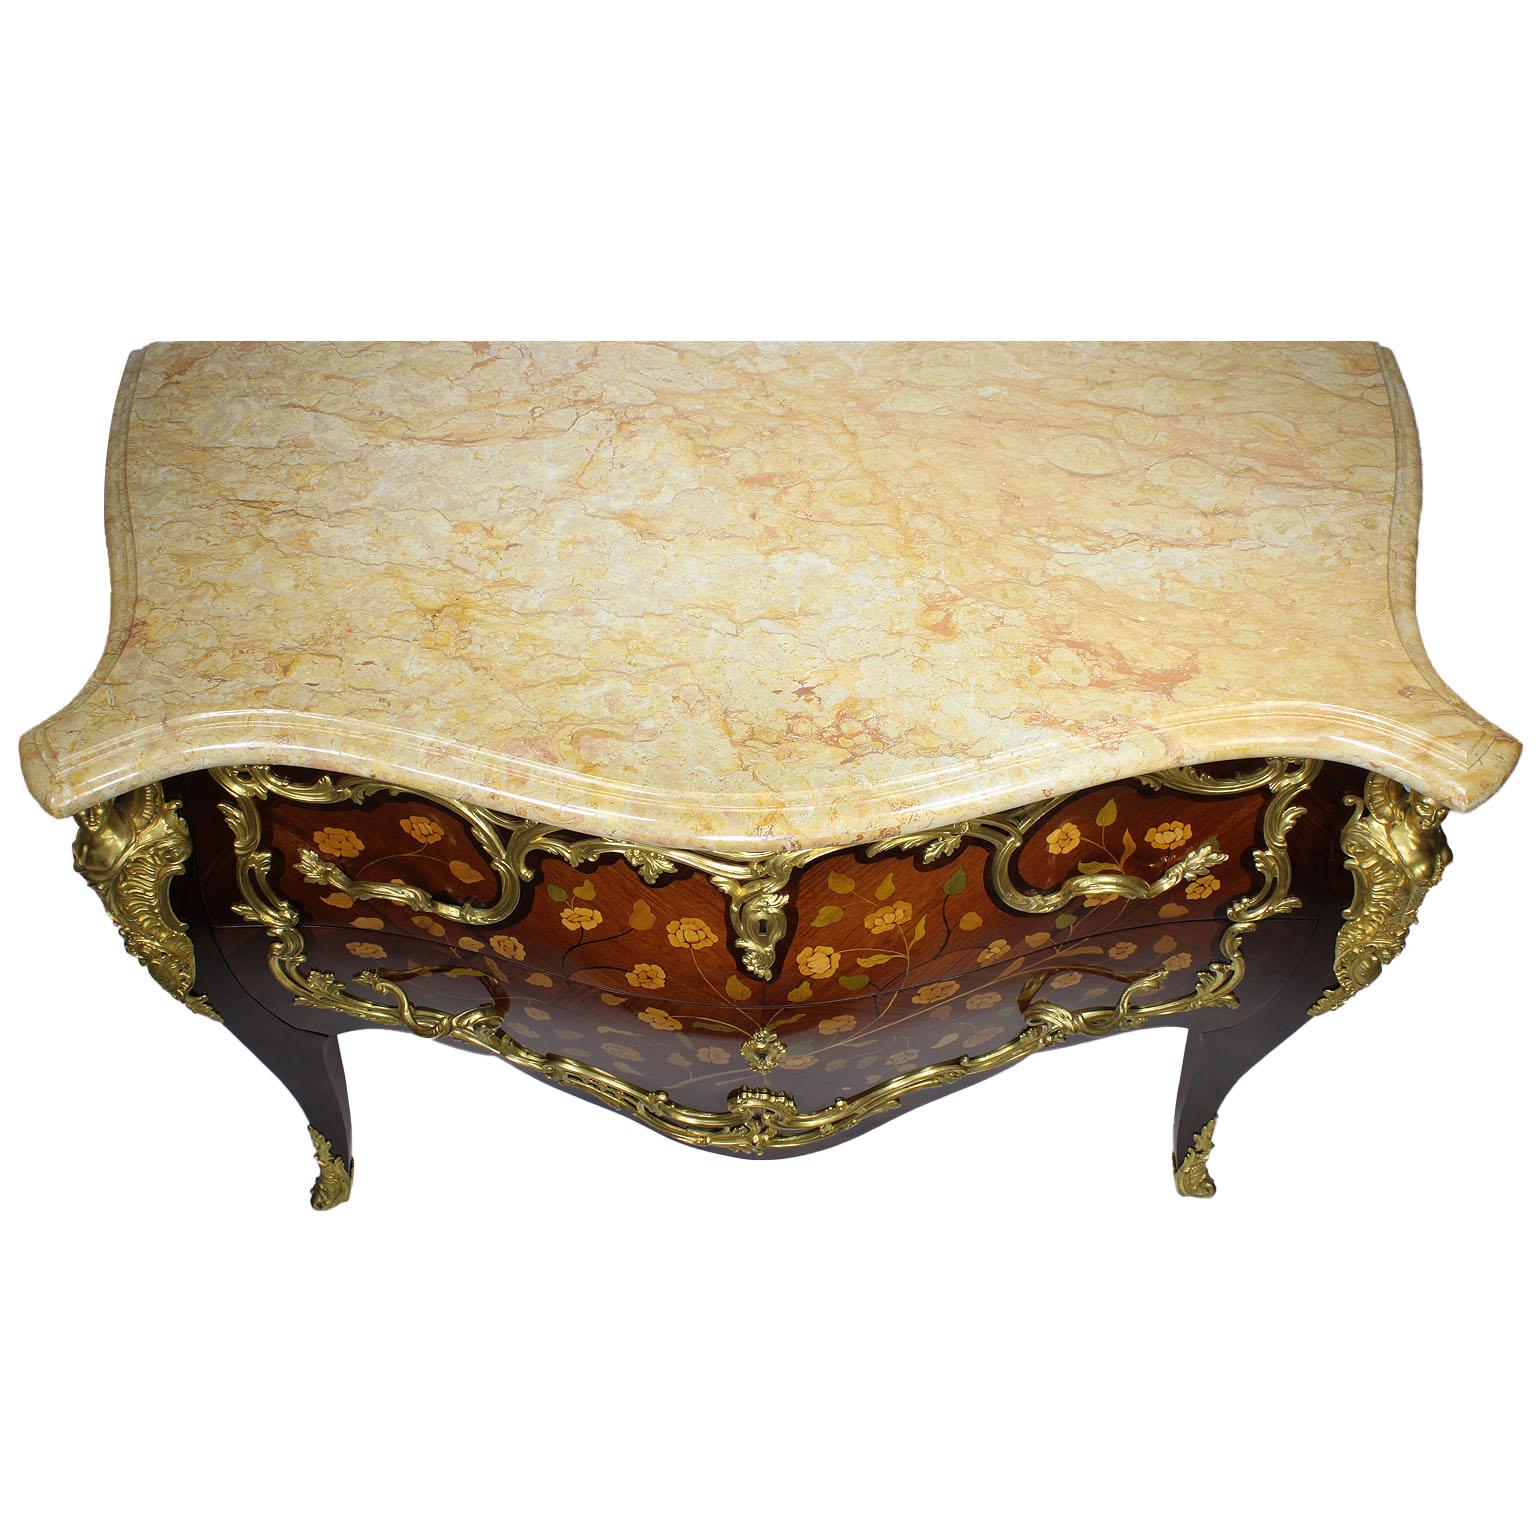 French 19th Century Louis XV Style Gilt Bronze-Mounted Marquetry Commodes, Pair For Sale 16